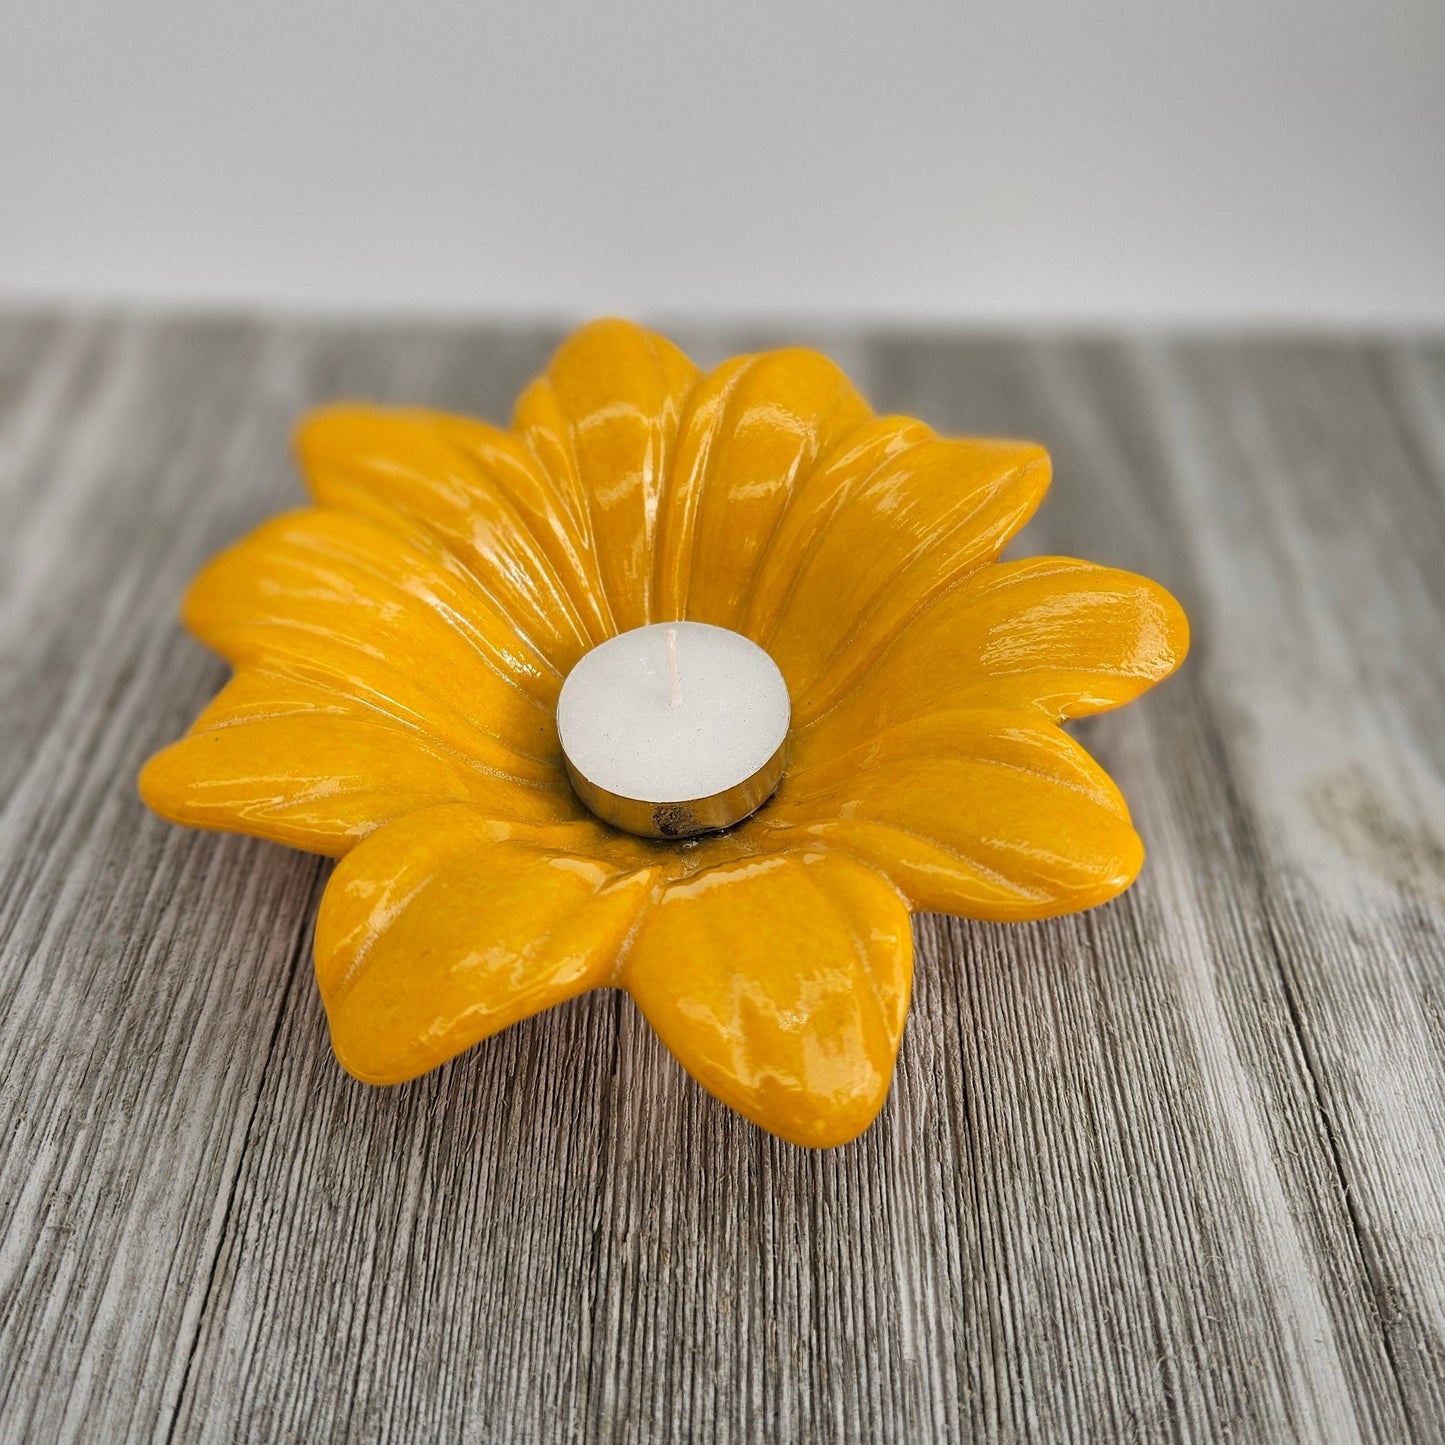 Handmade Fused Glass Daisy Bowl - Perfect Gift for Flower Lovers